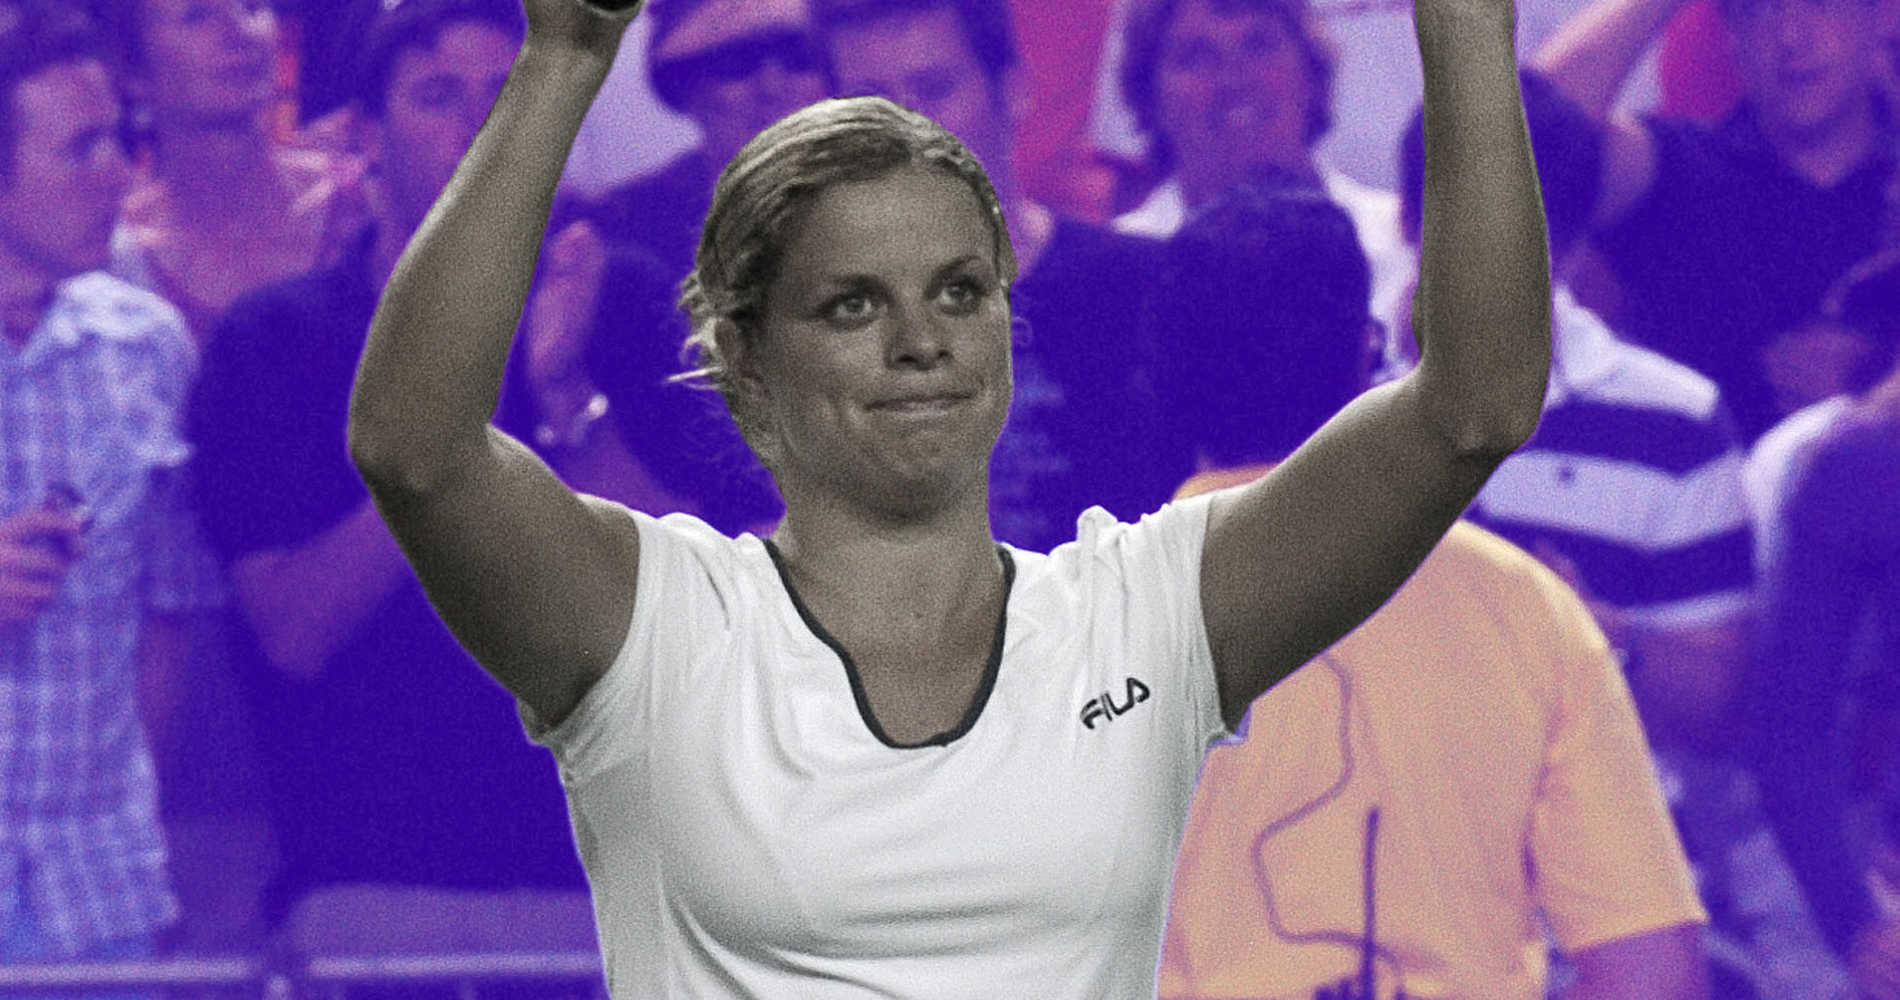 Kim Clijsters, On This Day